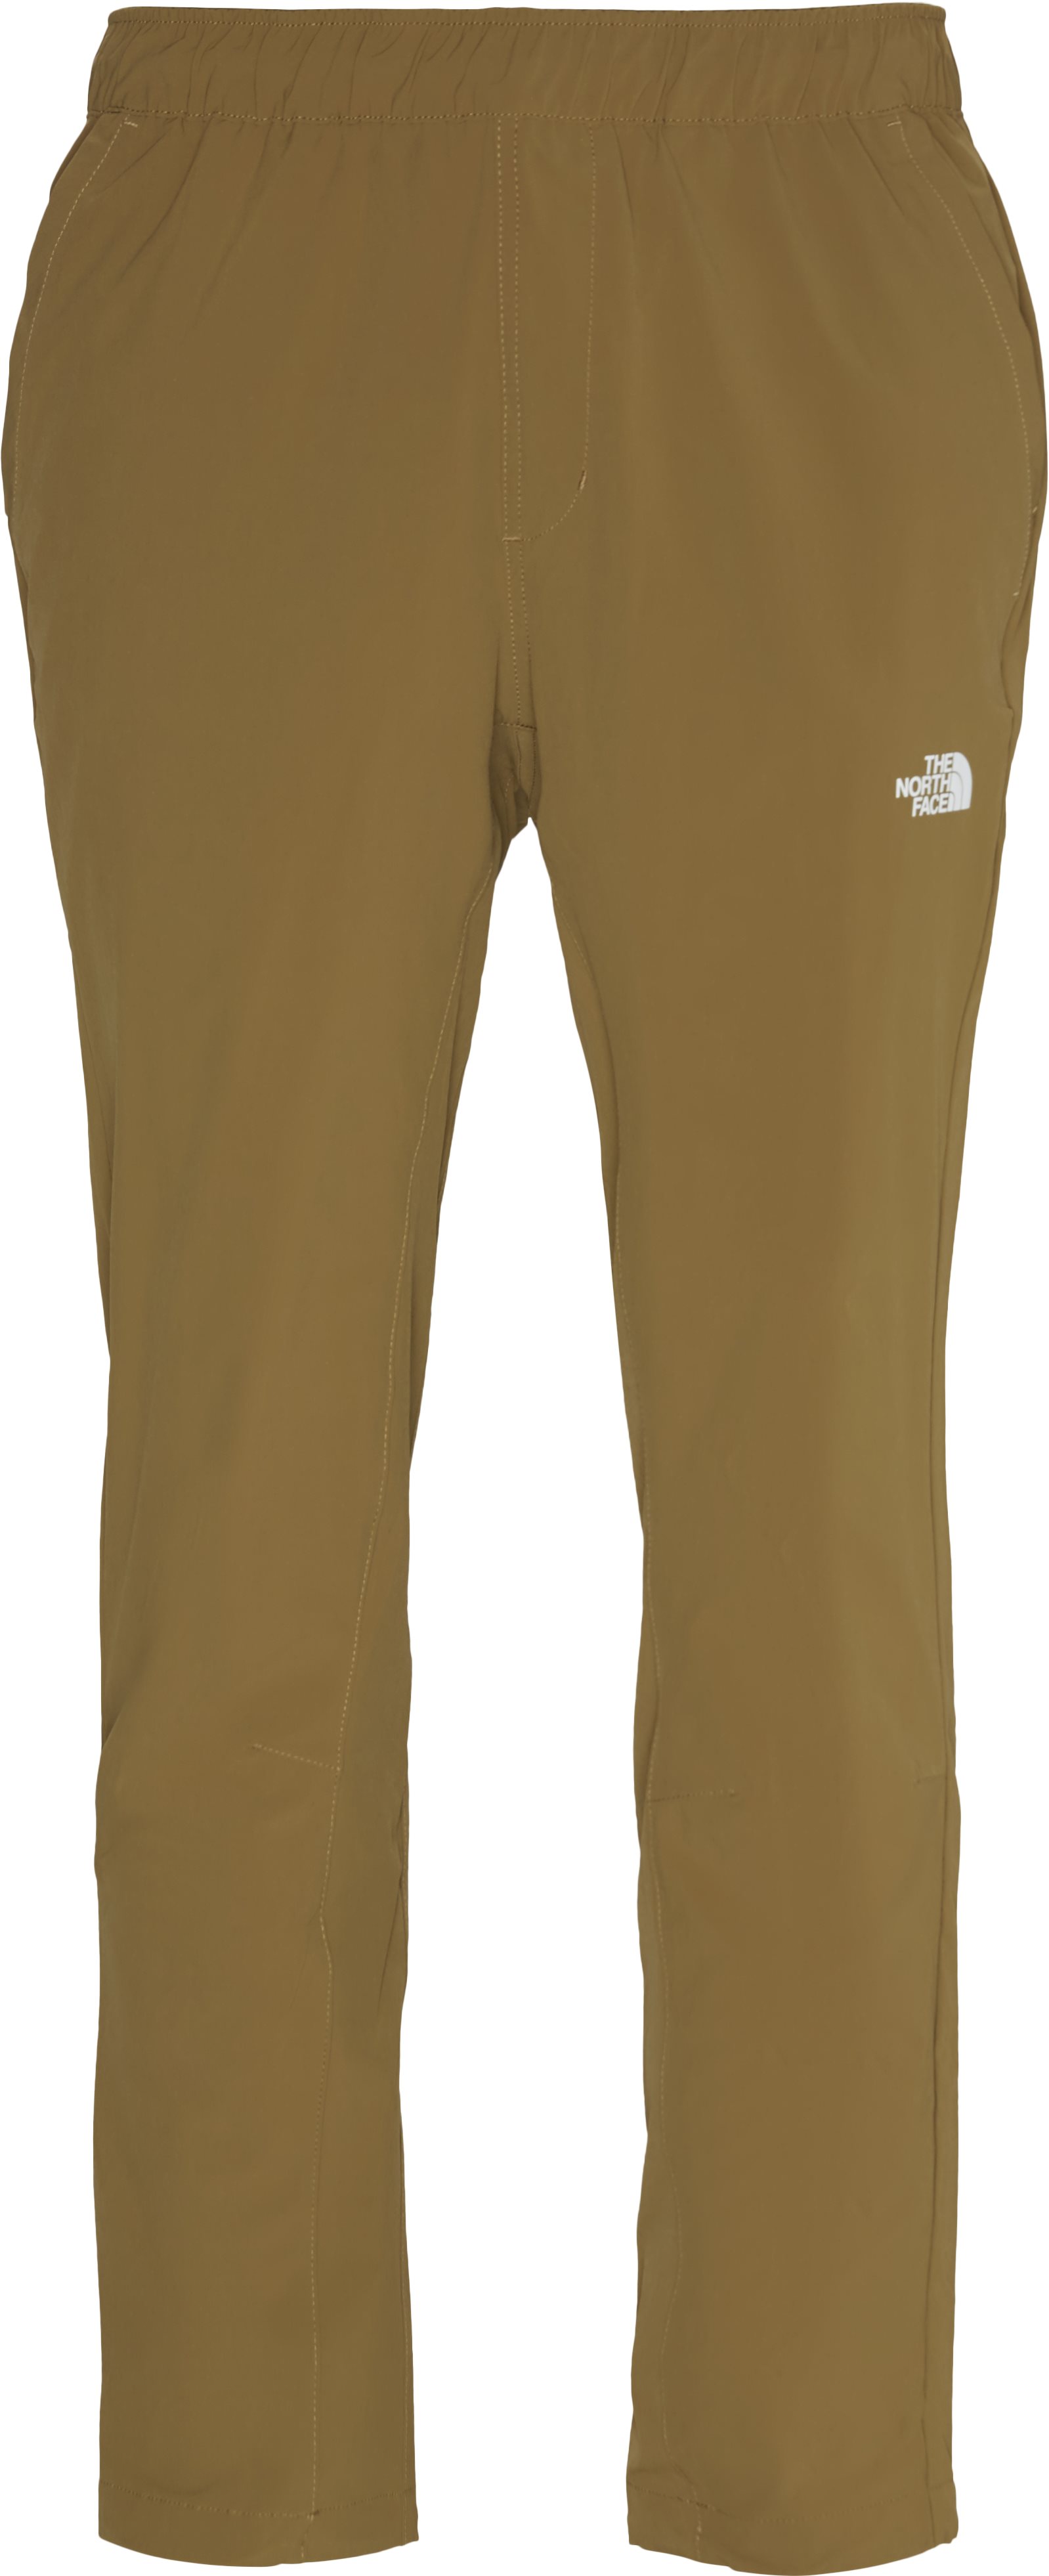 Mountain Pant - Trousers - Regular fit - Sand